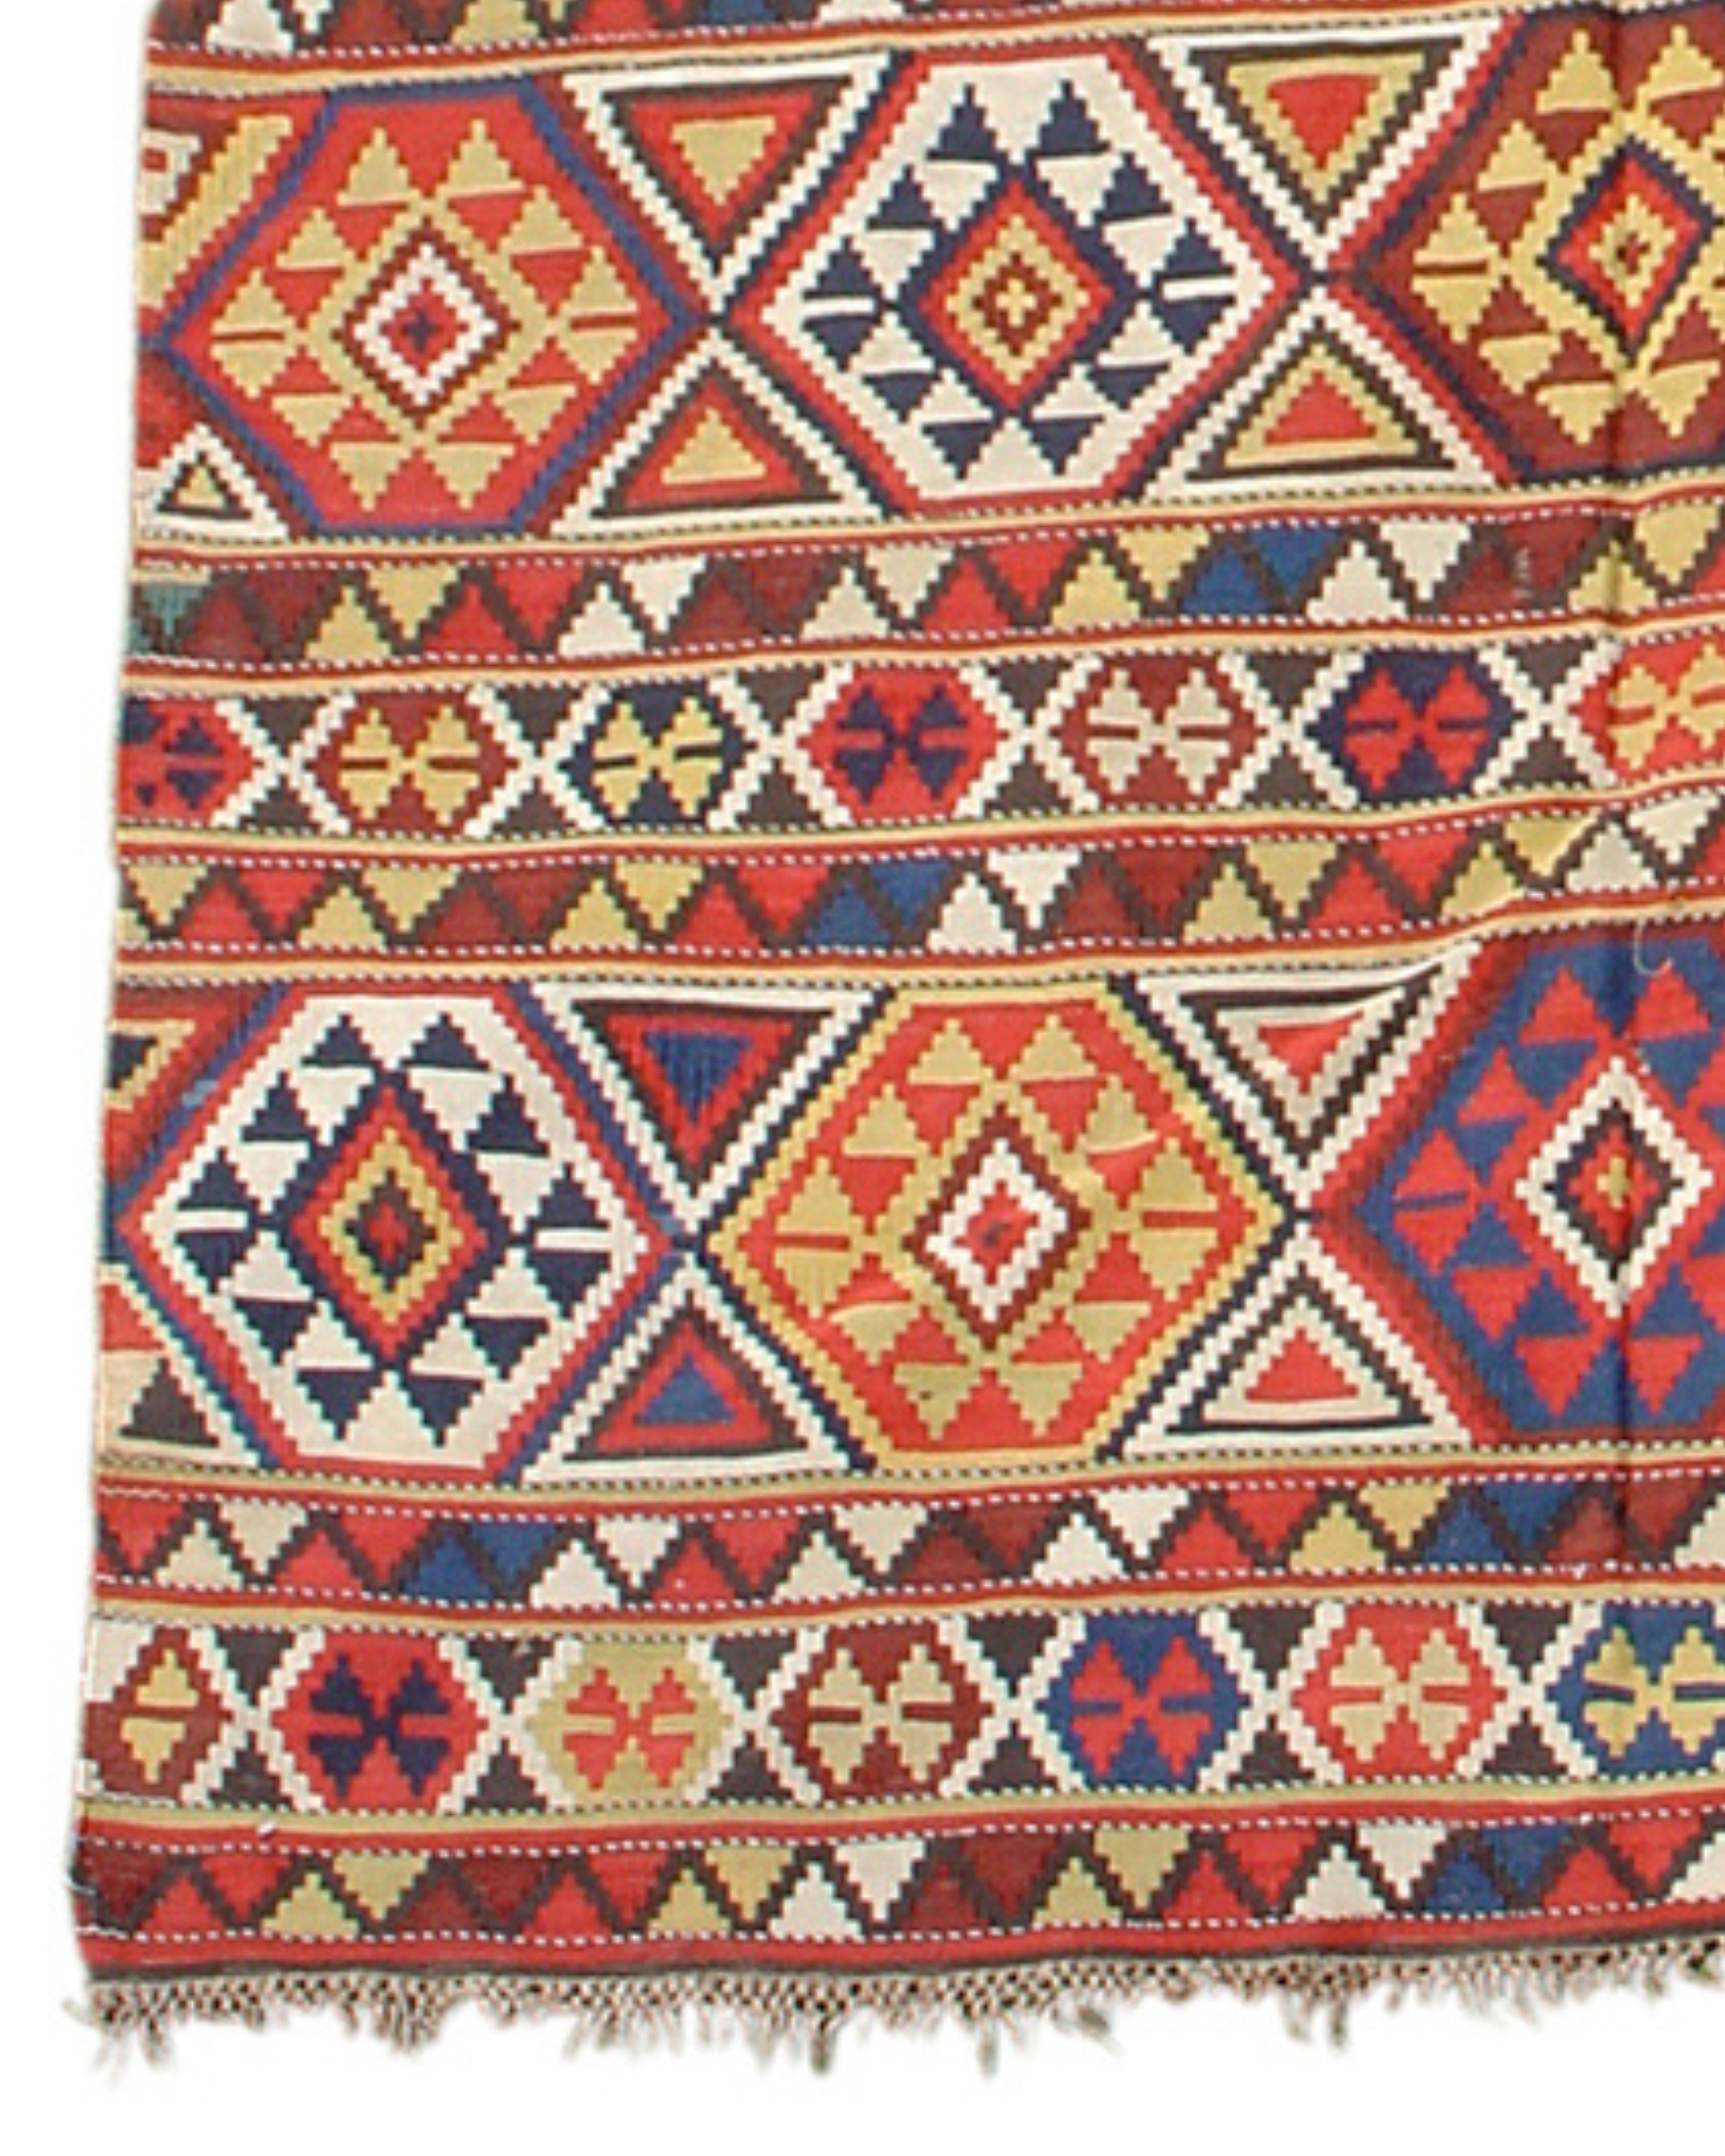 Shirvan Kilim Rug, 19th Century In Excellent Condition For Sale In San Francisco, CA